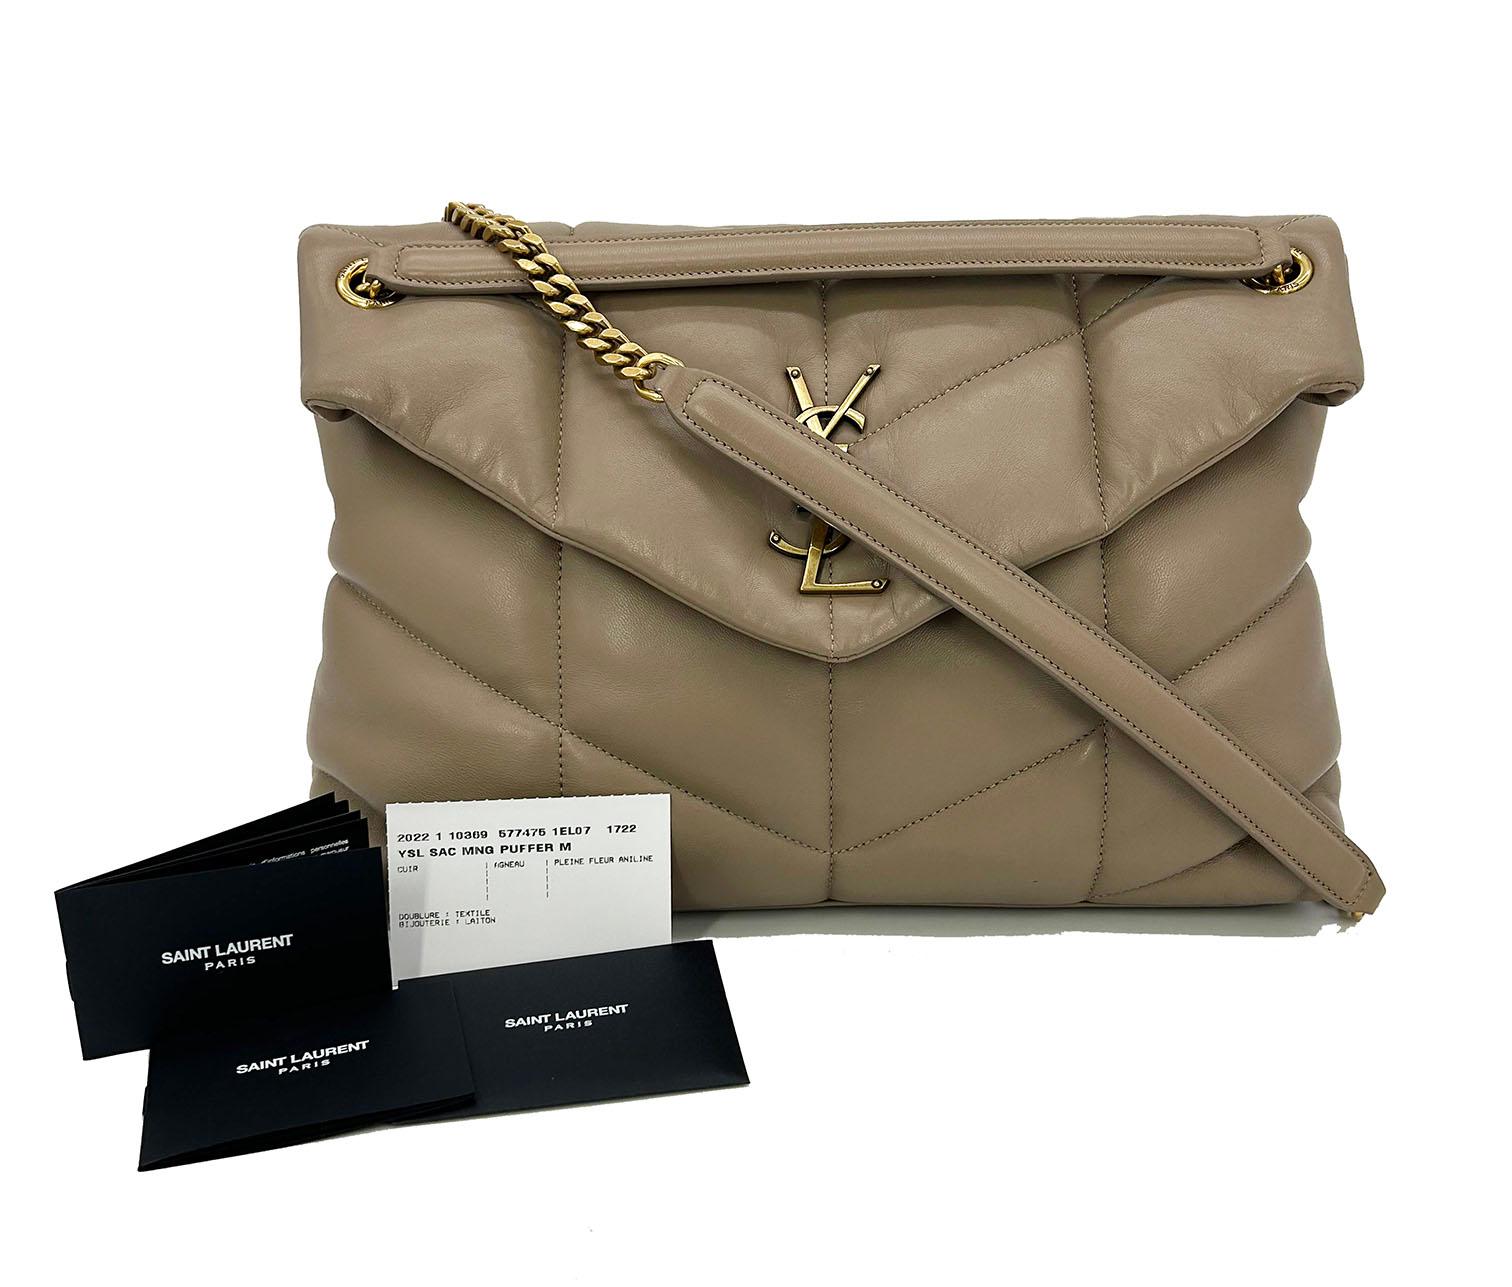 Saint Laurent Lou Lou Puffer Dusty Grey Medium Quilted Leather Shoulder Bag YSL For Sale 12